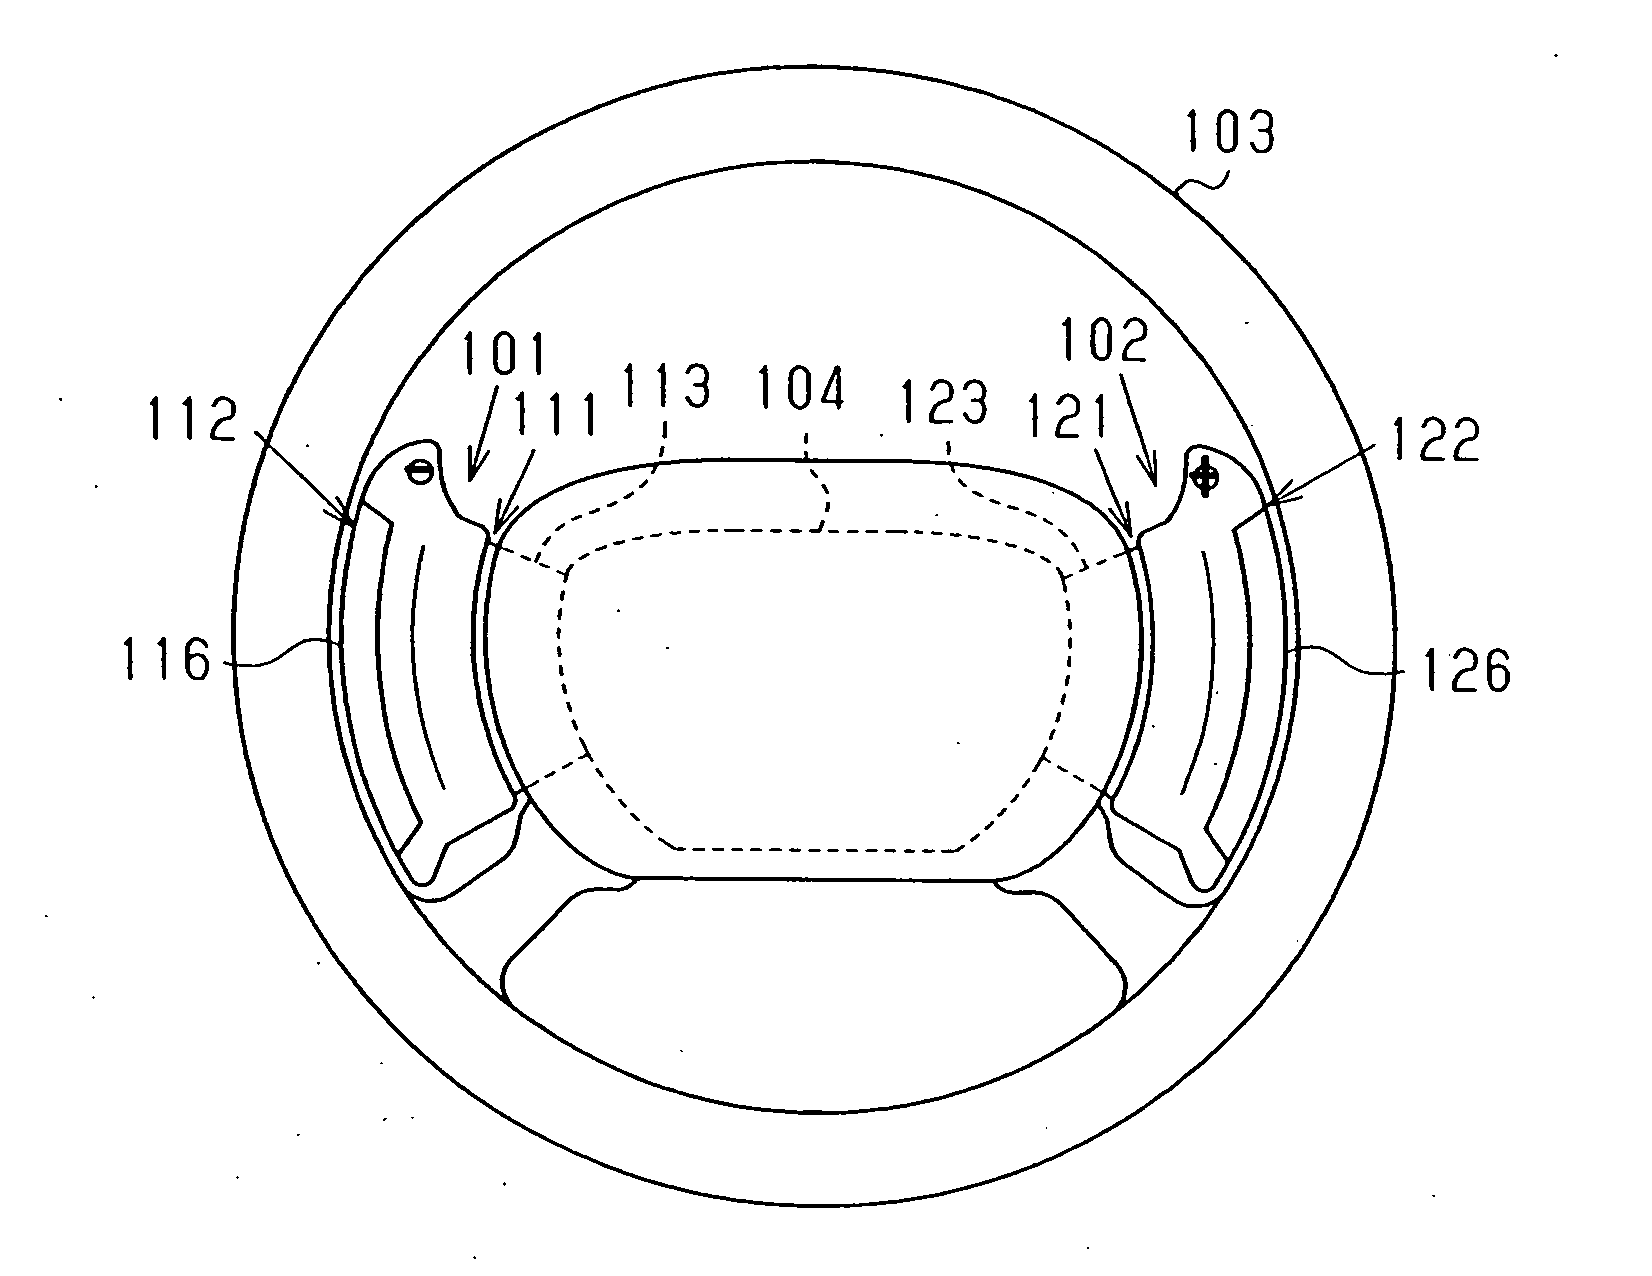 Switch apparatus for use in vehicles